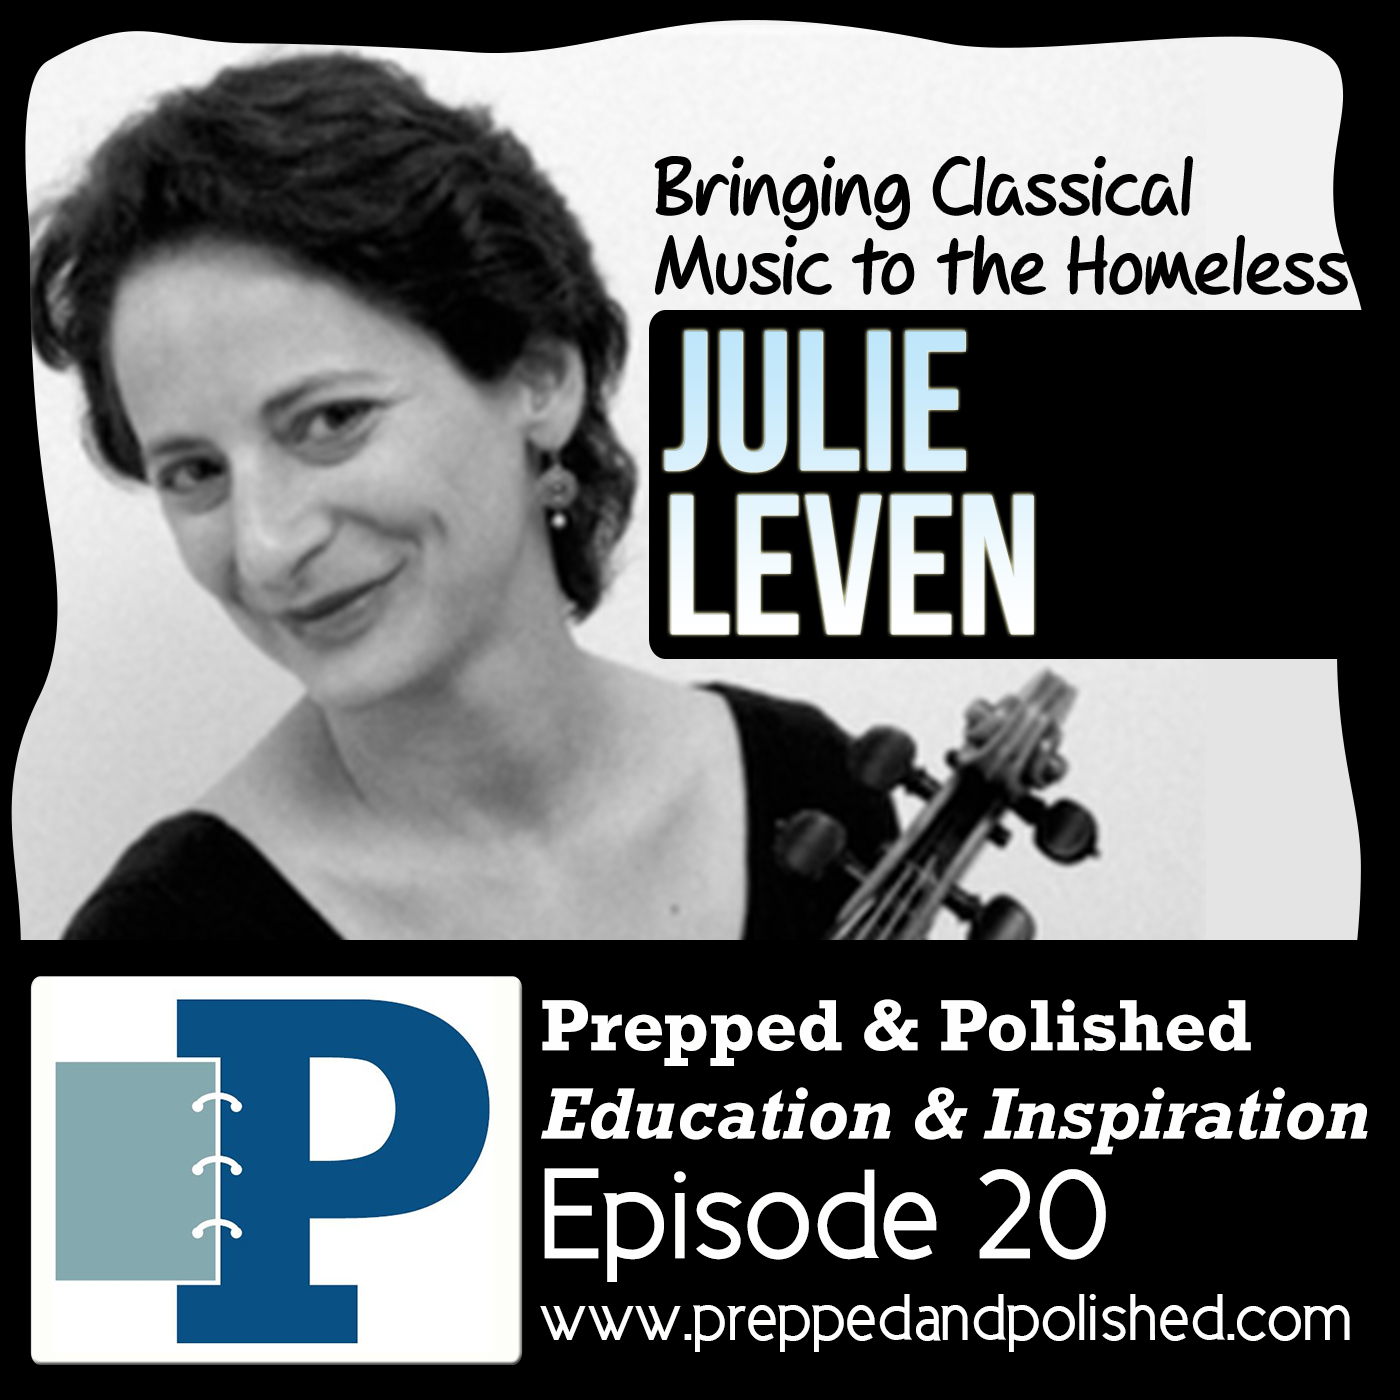 Podcast Episode 20, Julie Leven: Bringing Classical Music to the Homeless